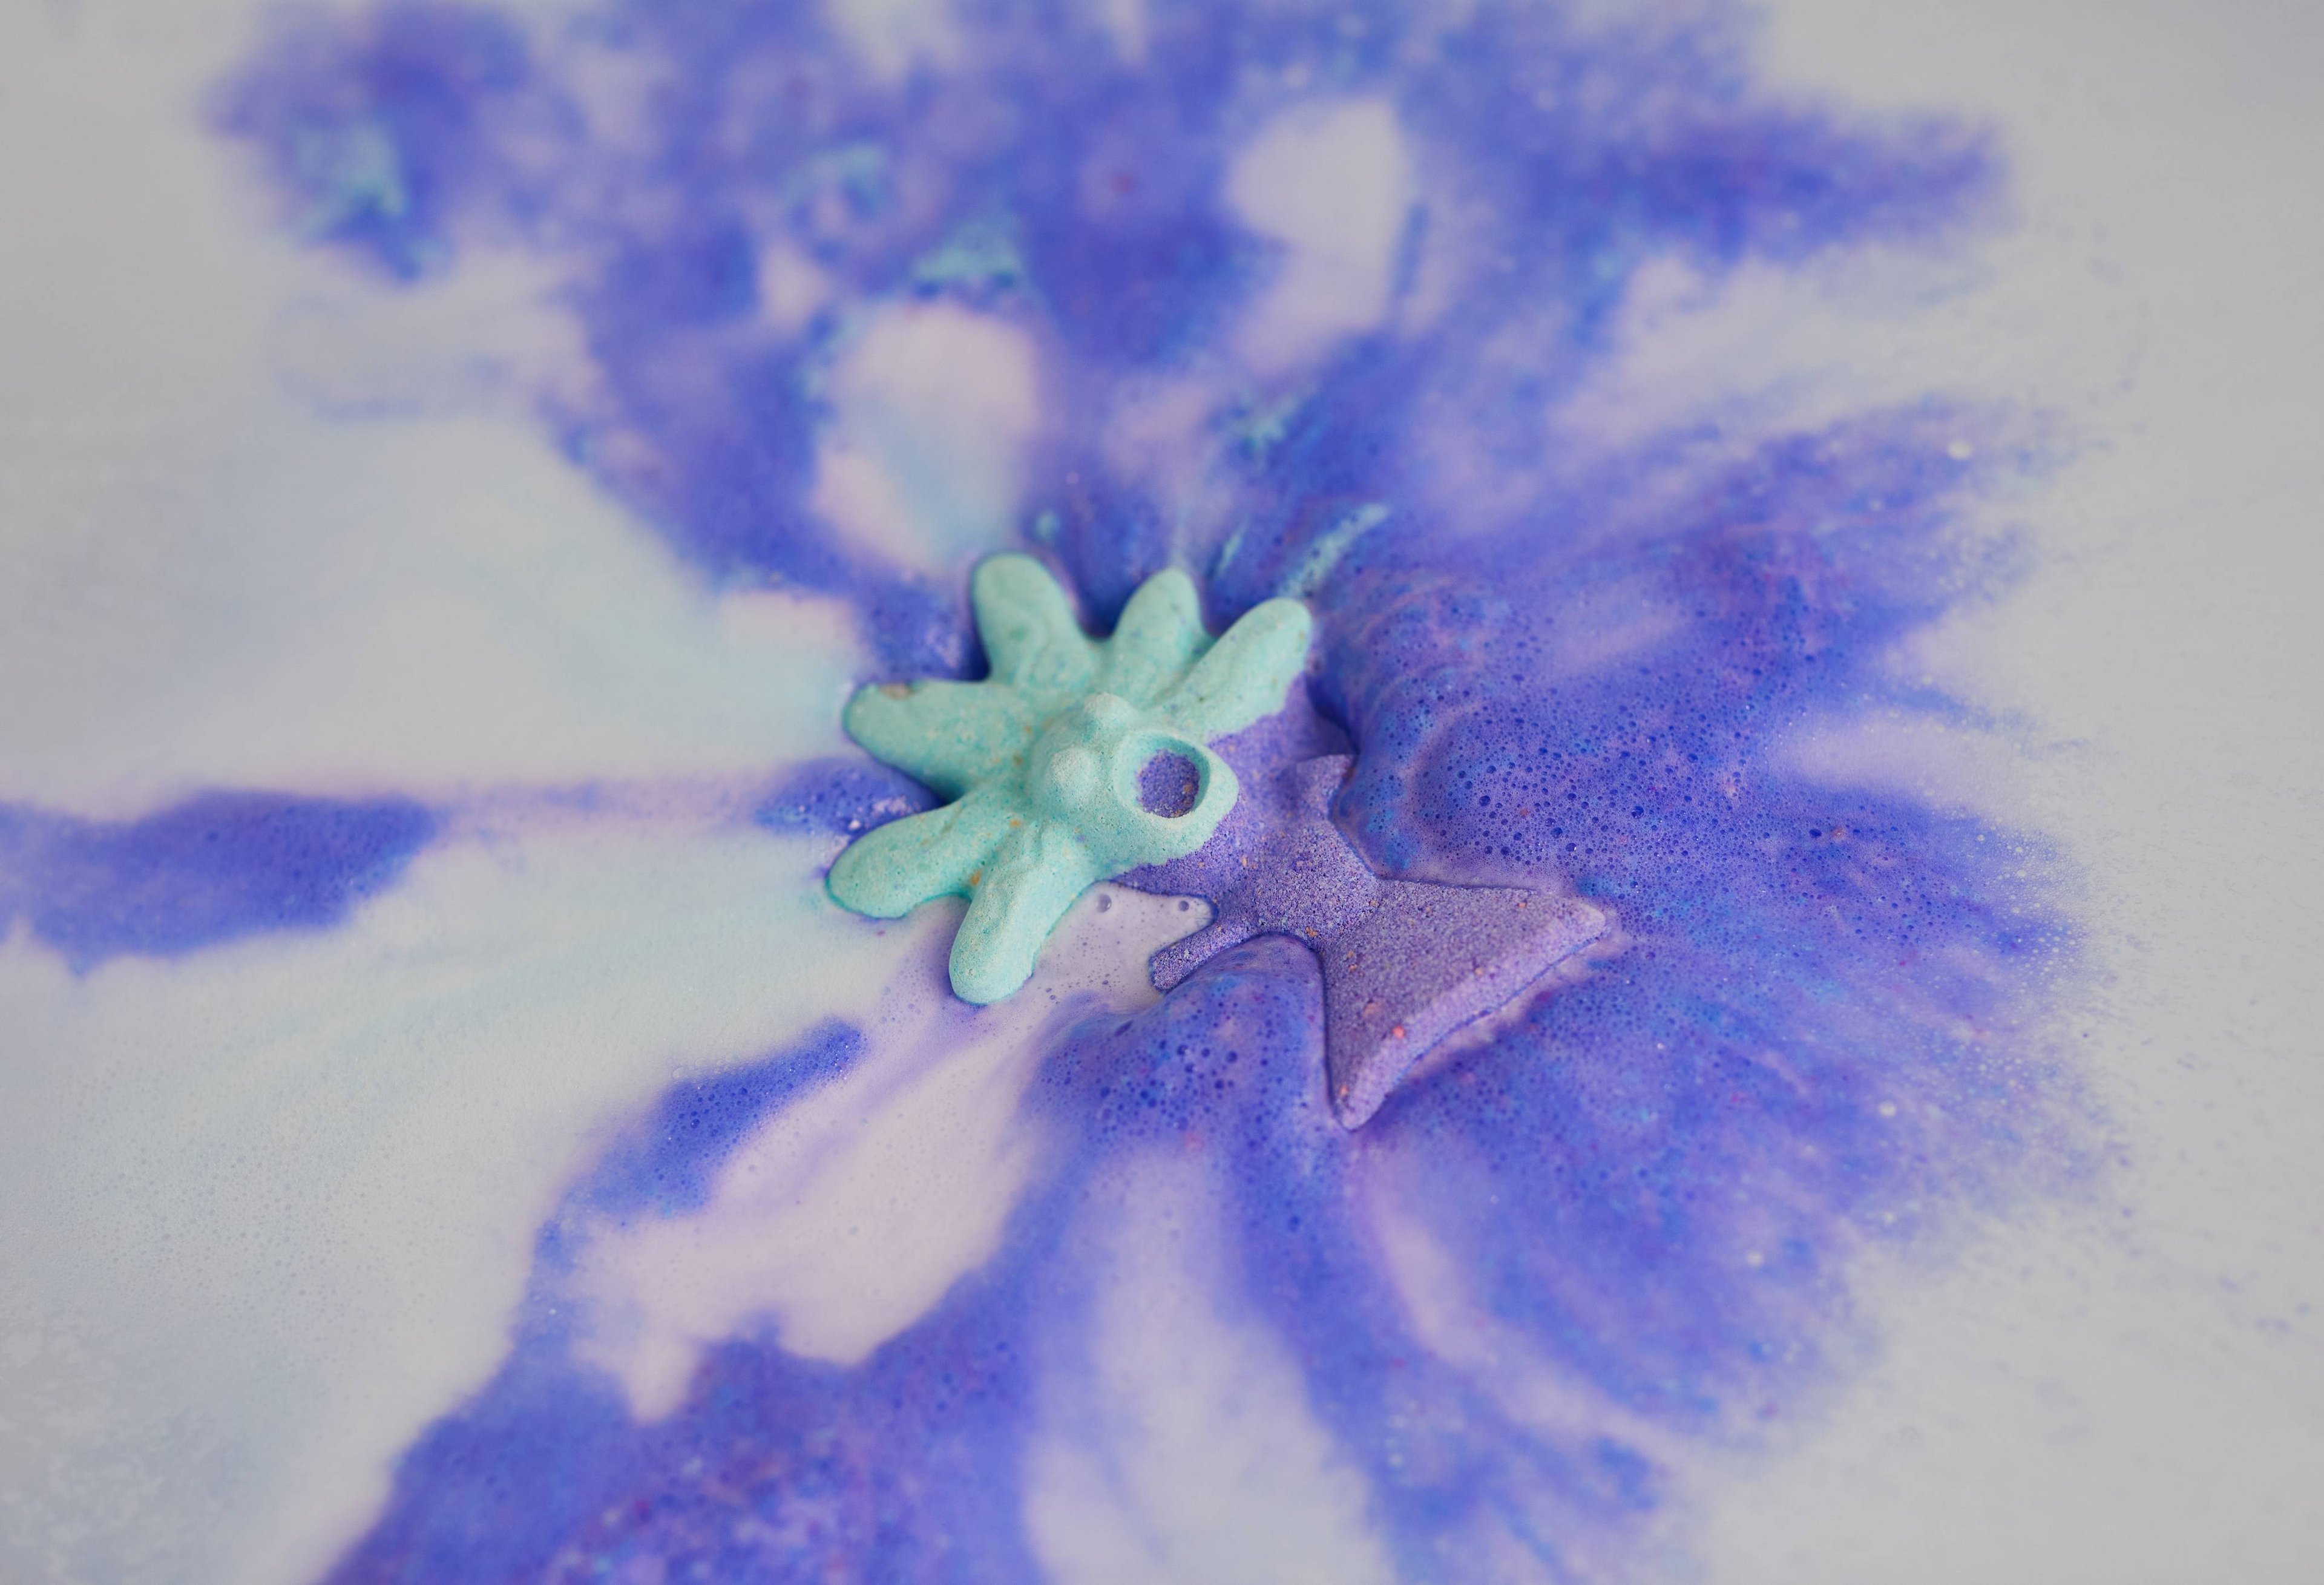 Bath bomb floats on the water, releasing foaming swirls of mystical blue and purple. 